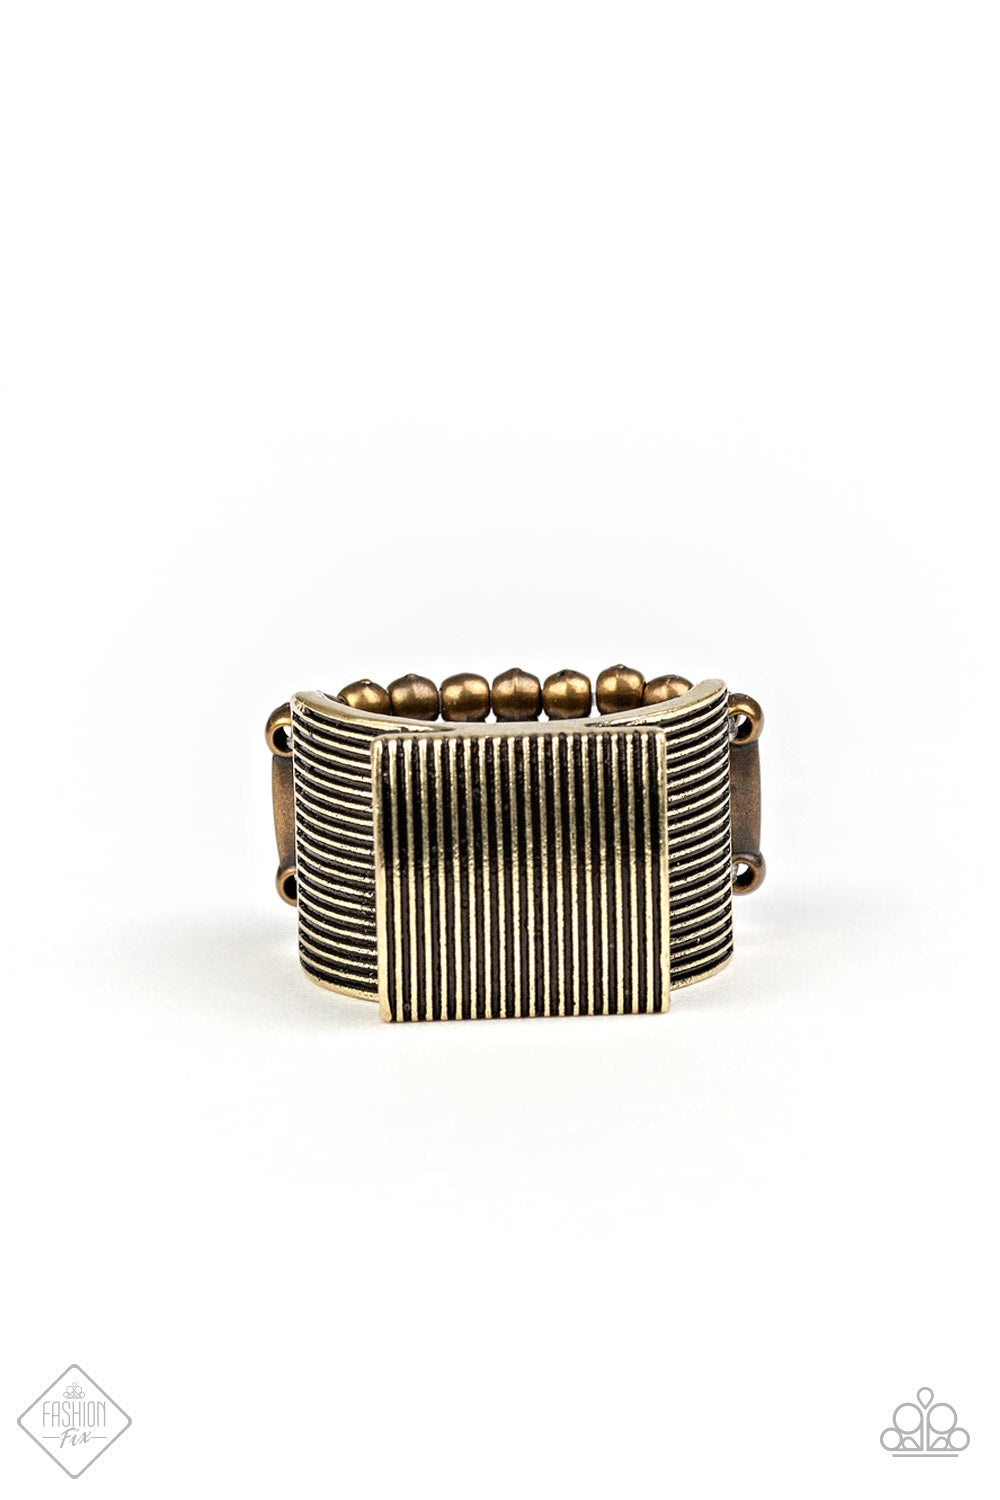 In GRATE Measure Brass Paparazzi Ring Cashmere Pink Jewels - Cashmere Pink Jewels & Accessories, Cashmere Pink Jewels & Accessories - Paparazzi